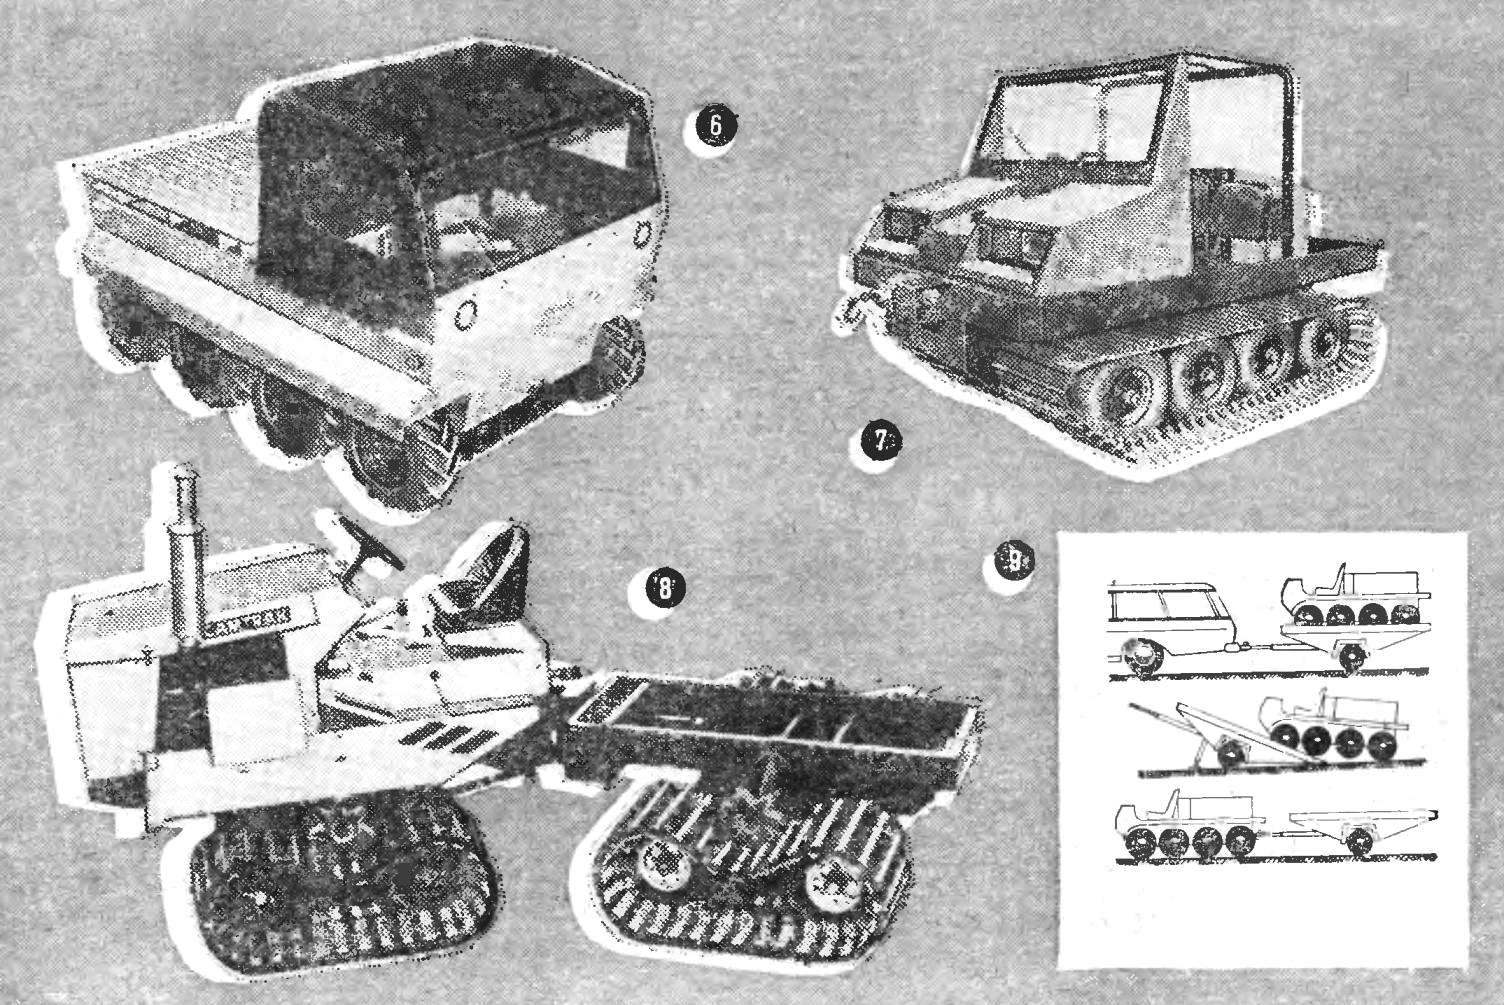 R and S. 6 all-terrain Vehicle 